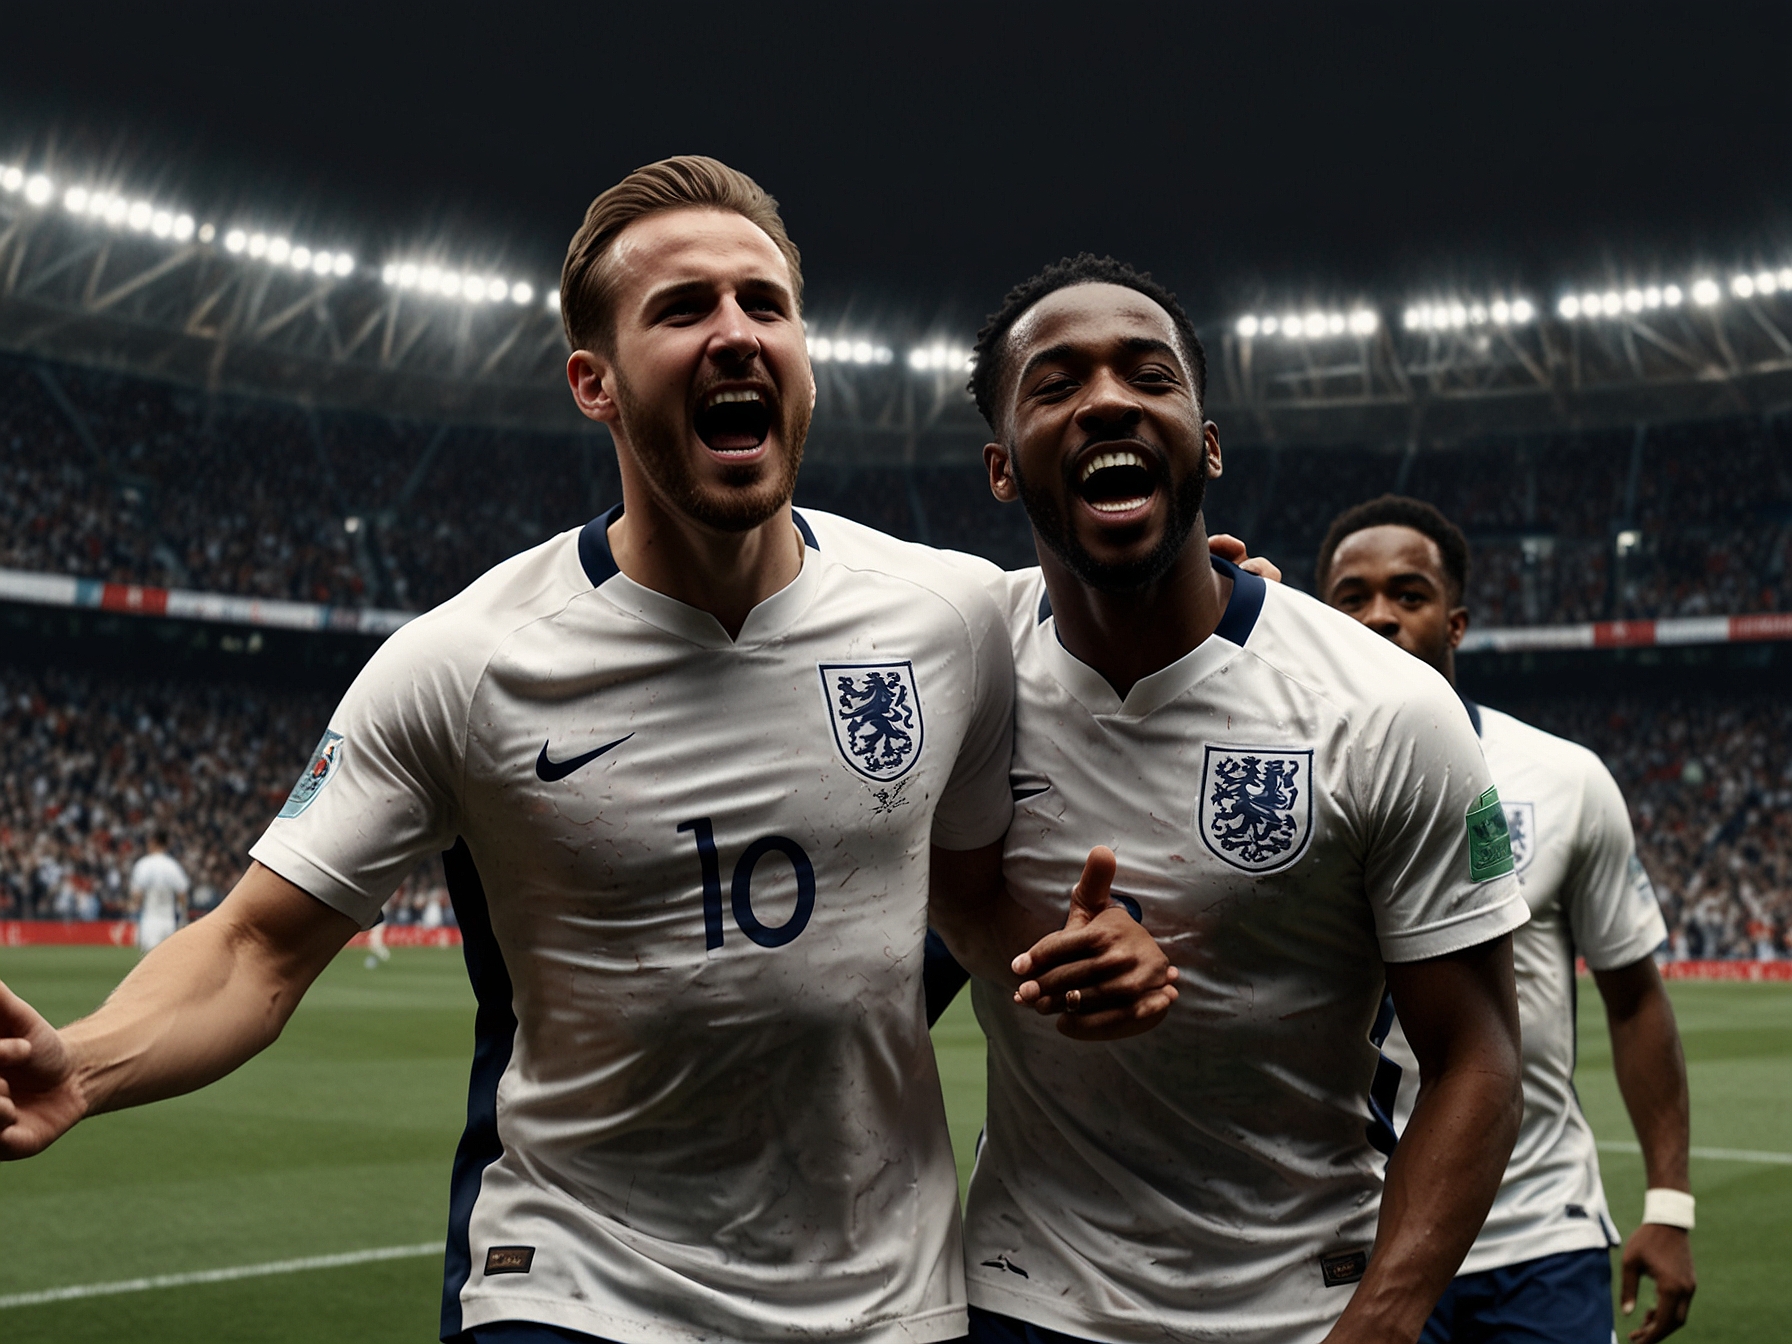 Illustration of England's national football team players, including Harry Kane and Raheem Sterling, celebrating a victory during a group match in Euro 2024.